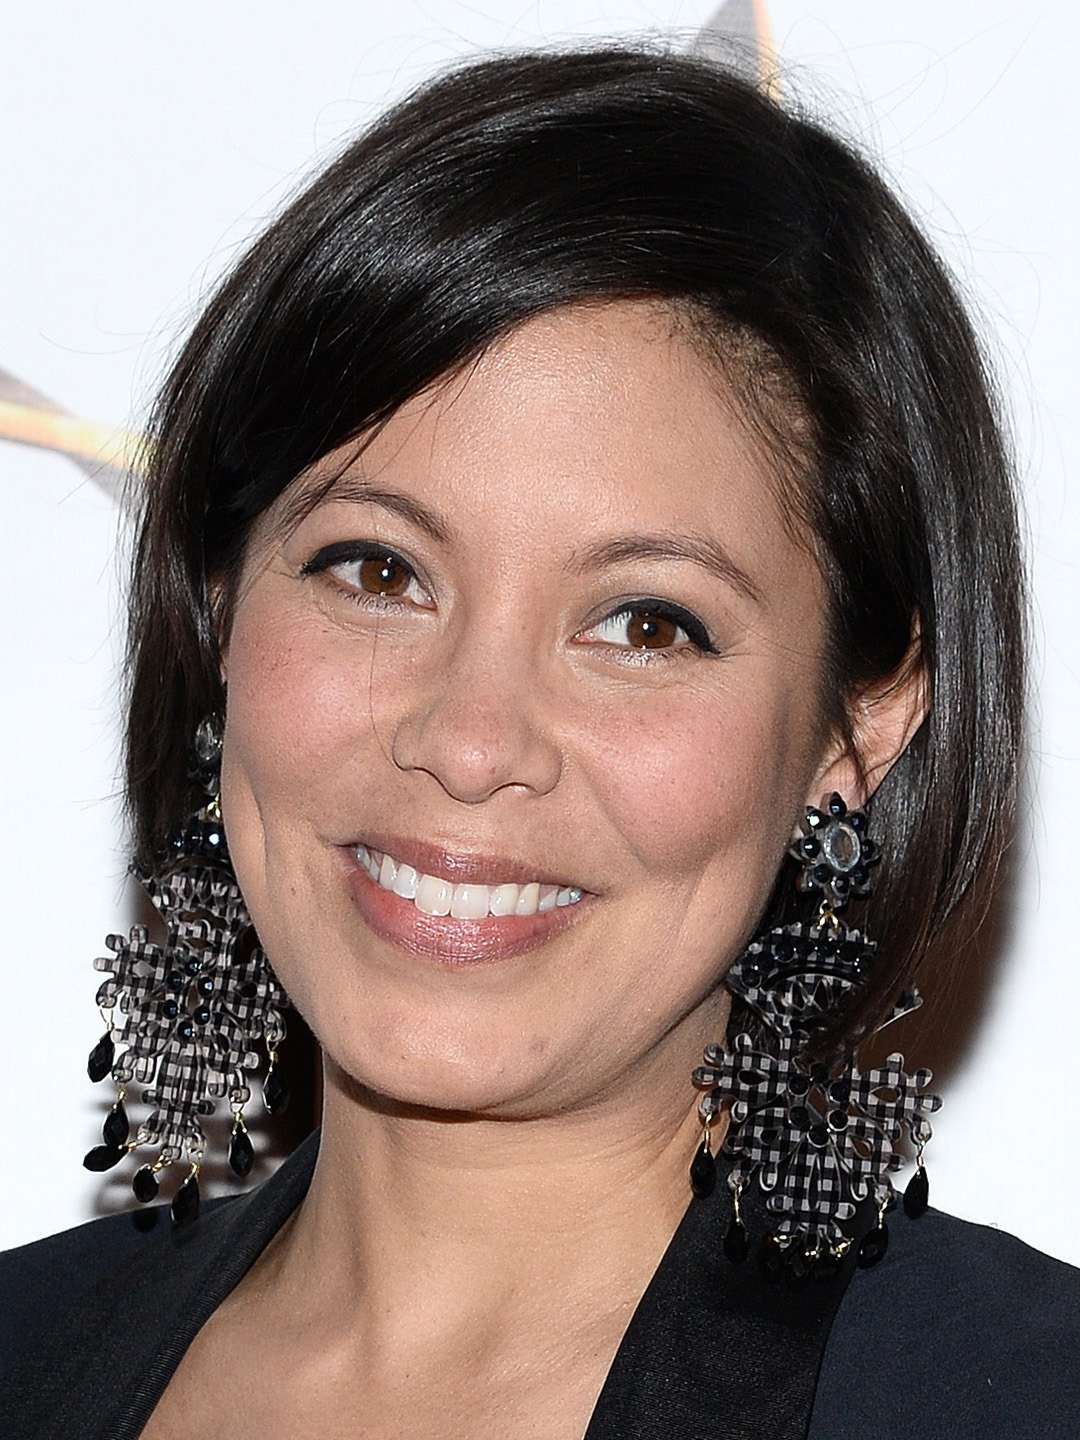 Alex Wagner to take over Rachel Maddow's MSNBC timeslot